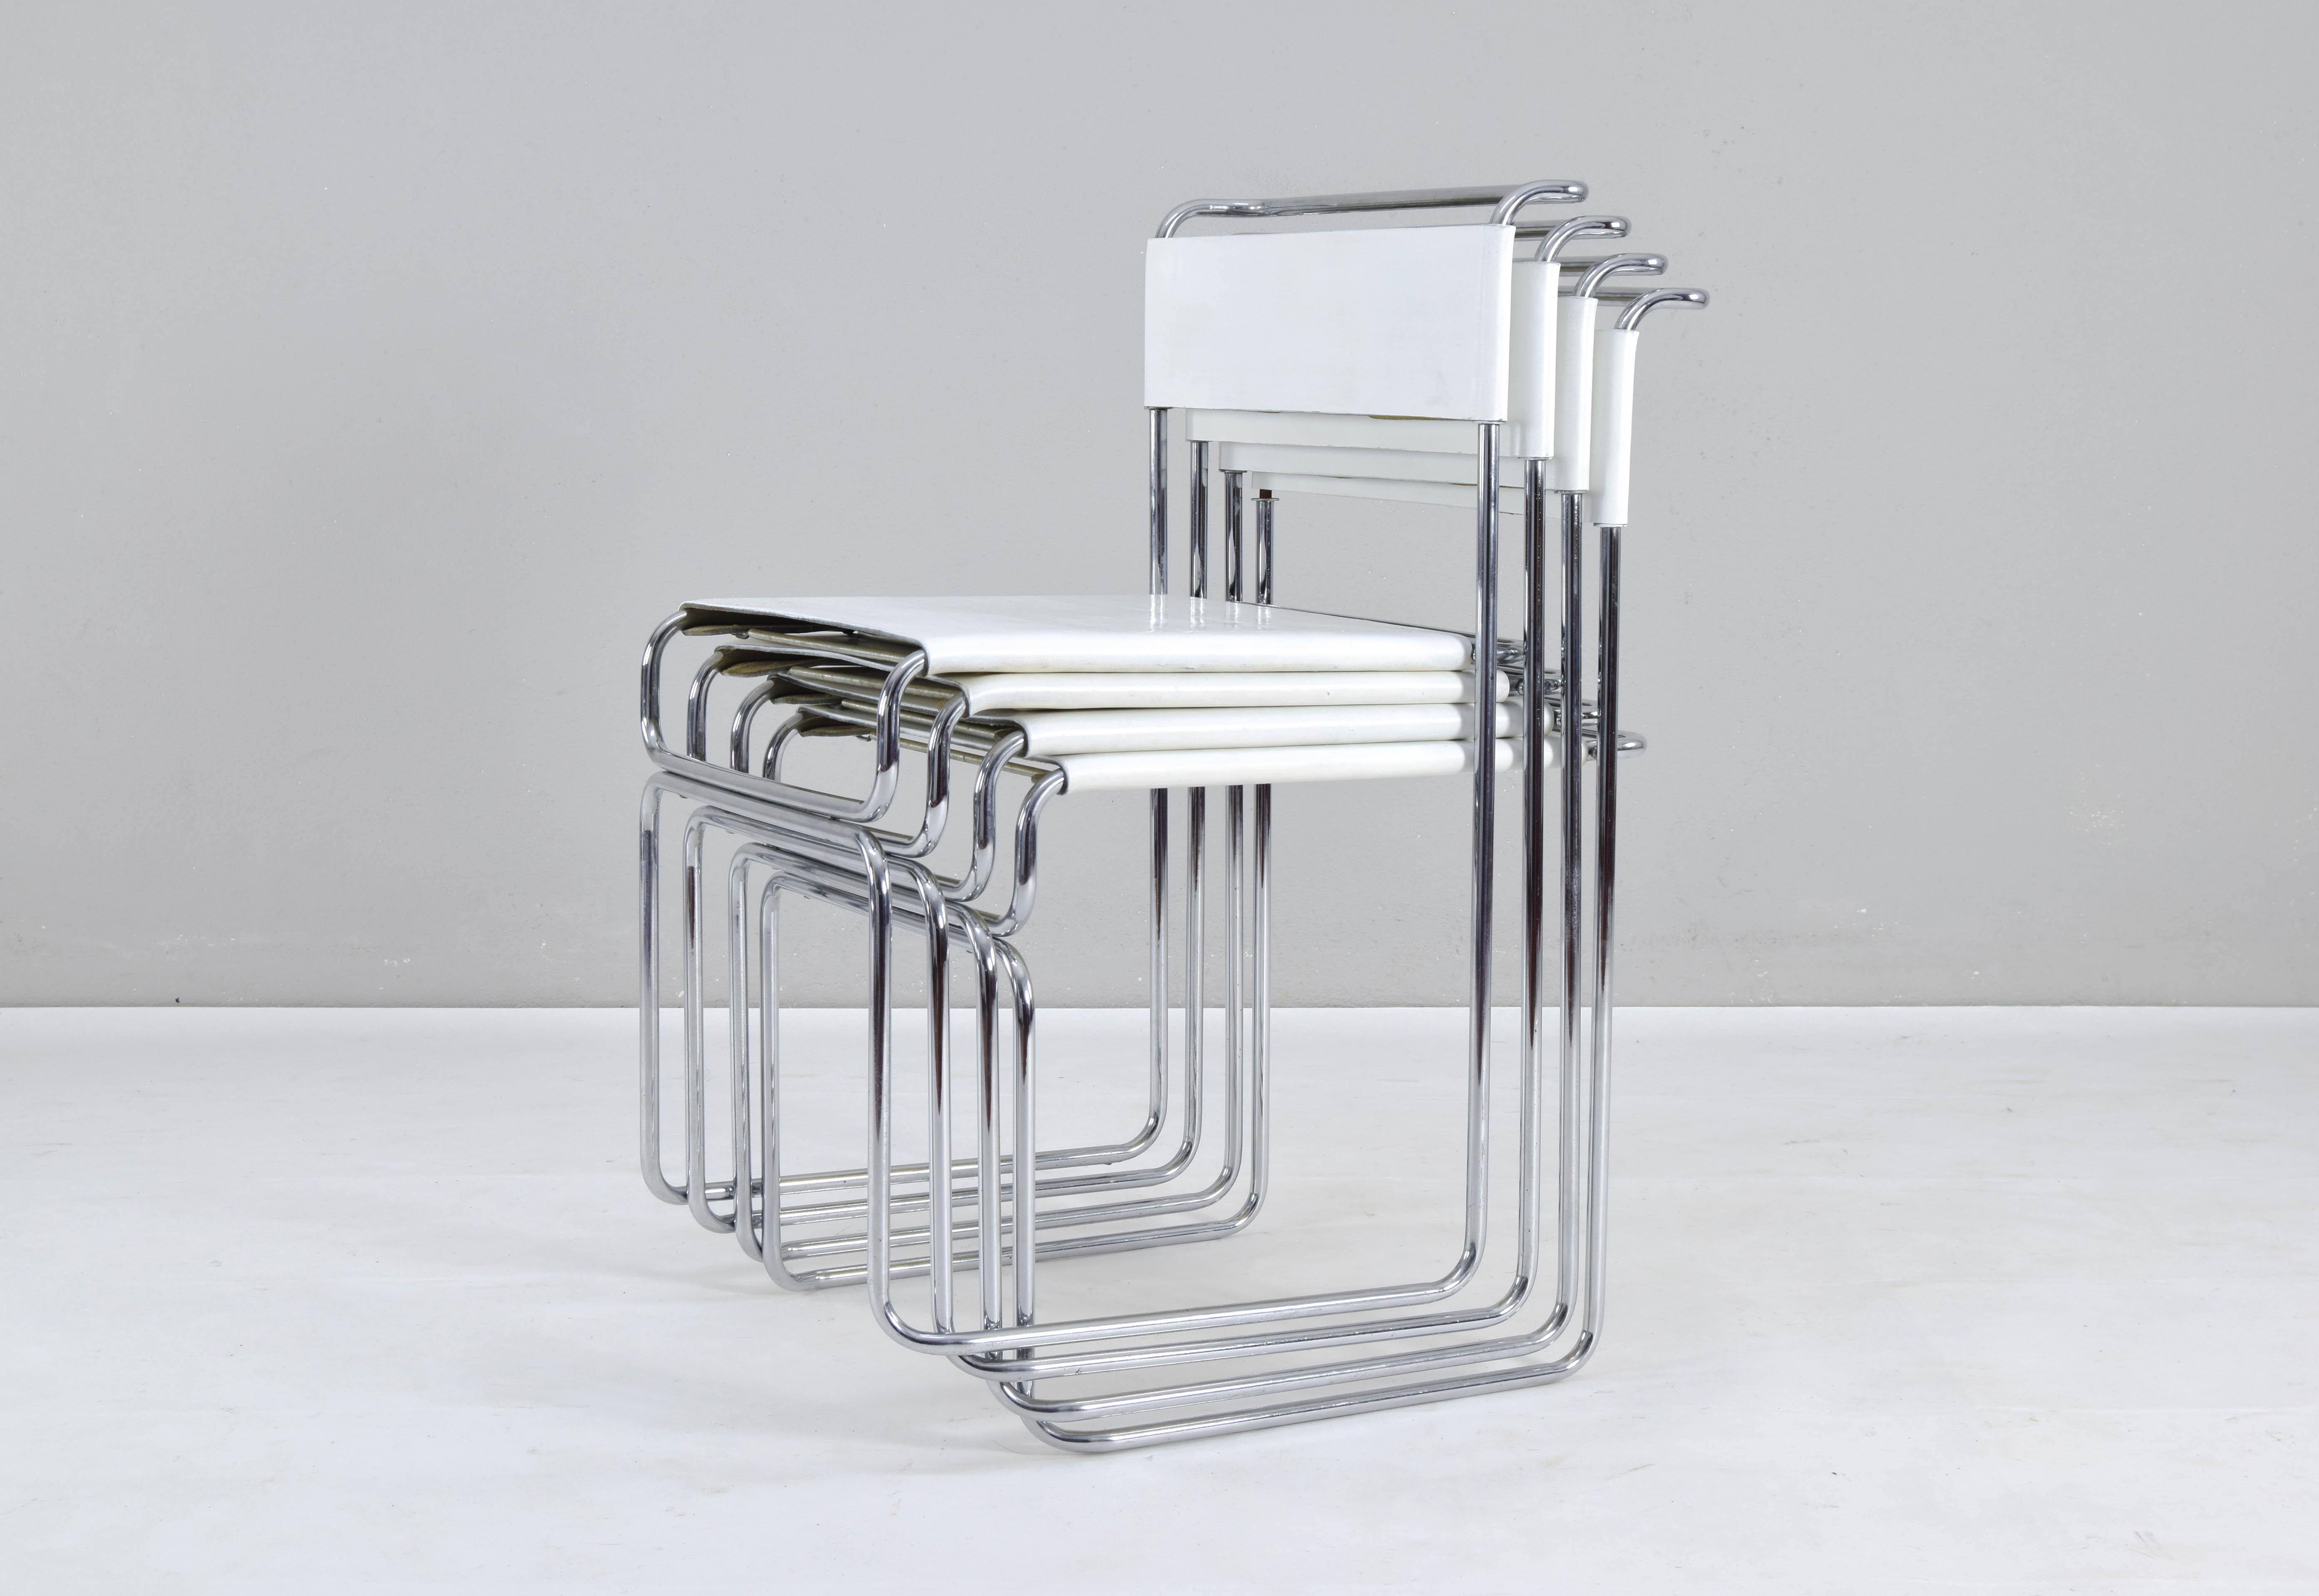 Set of four Libellula Stackable Dining Chairs by Giovanni Carini for Planula, Italy 1970s.
Chromed steel structure and white leather upholstery attached to the structure by a system of exposed springs.
Spectacular design and very good original